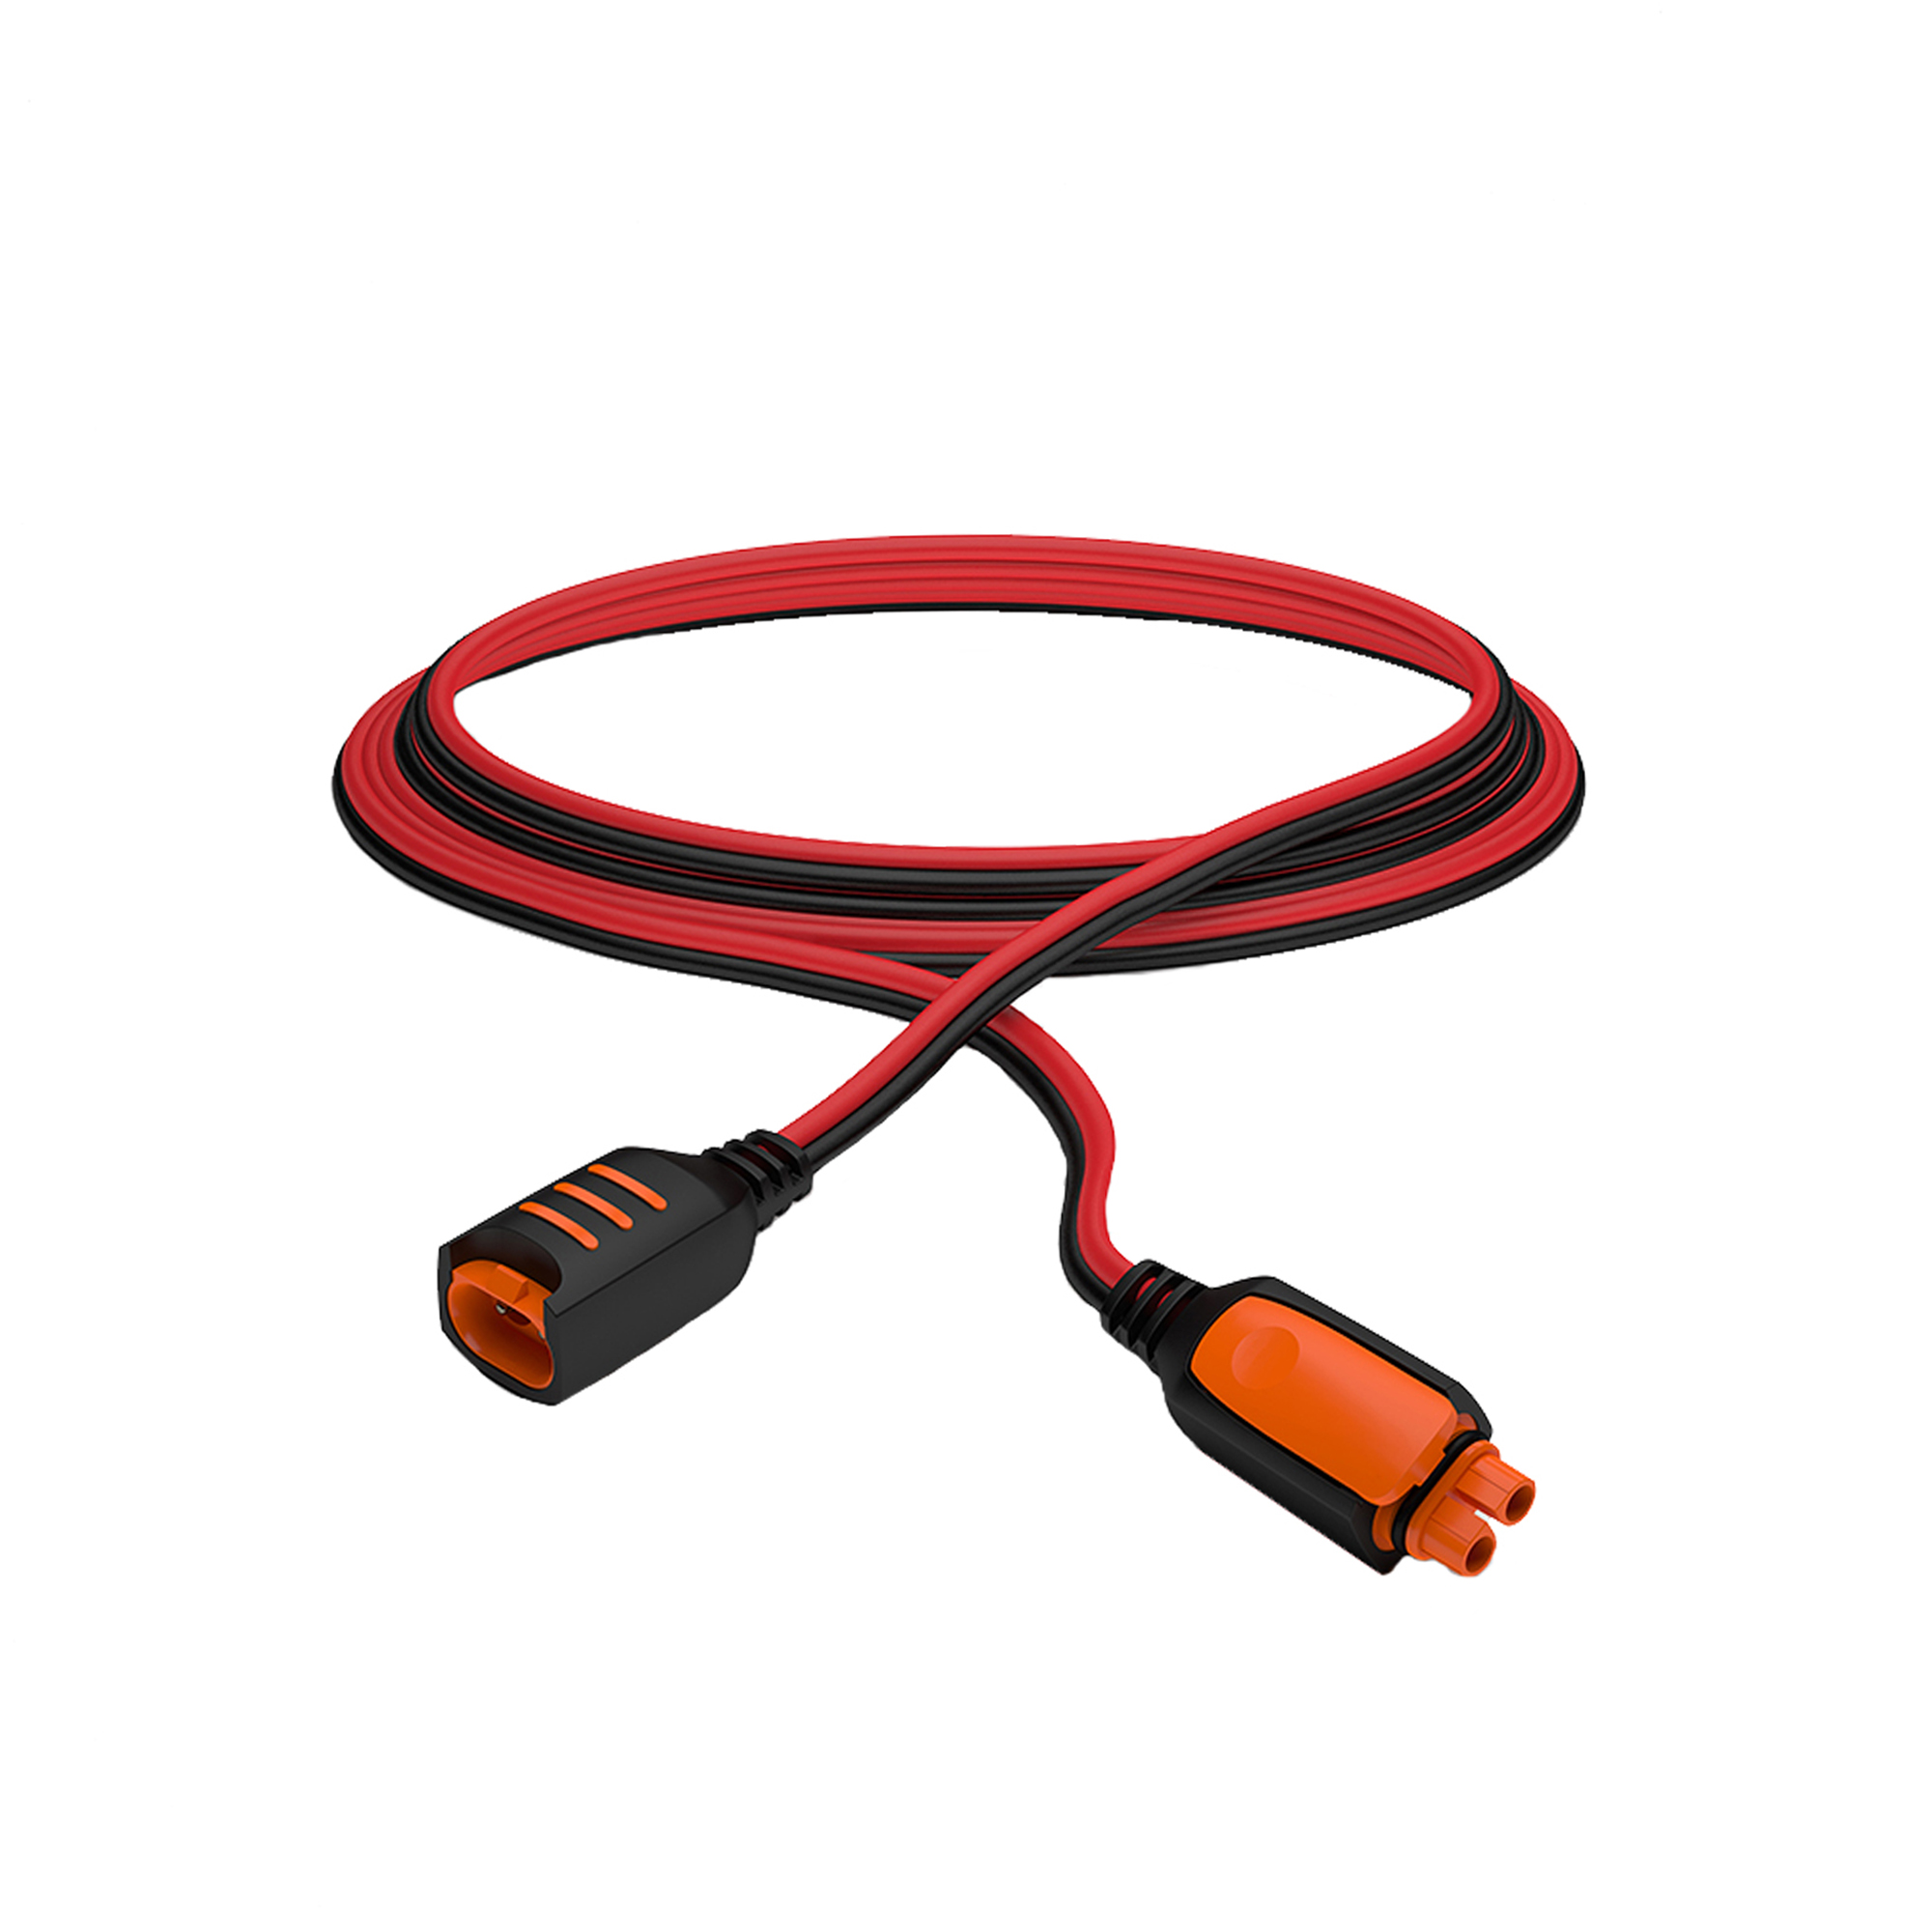 Connect 2.5m Extension Cable